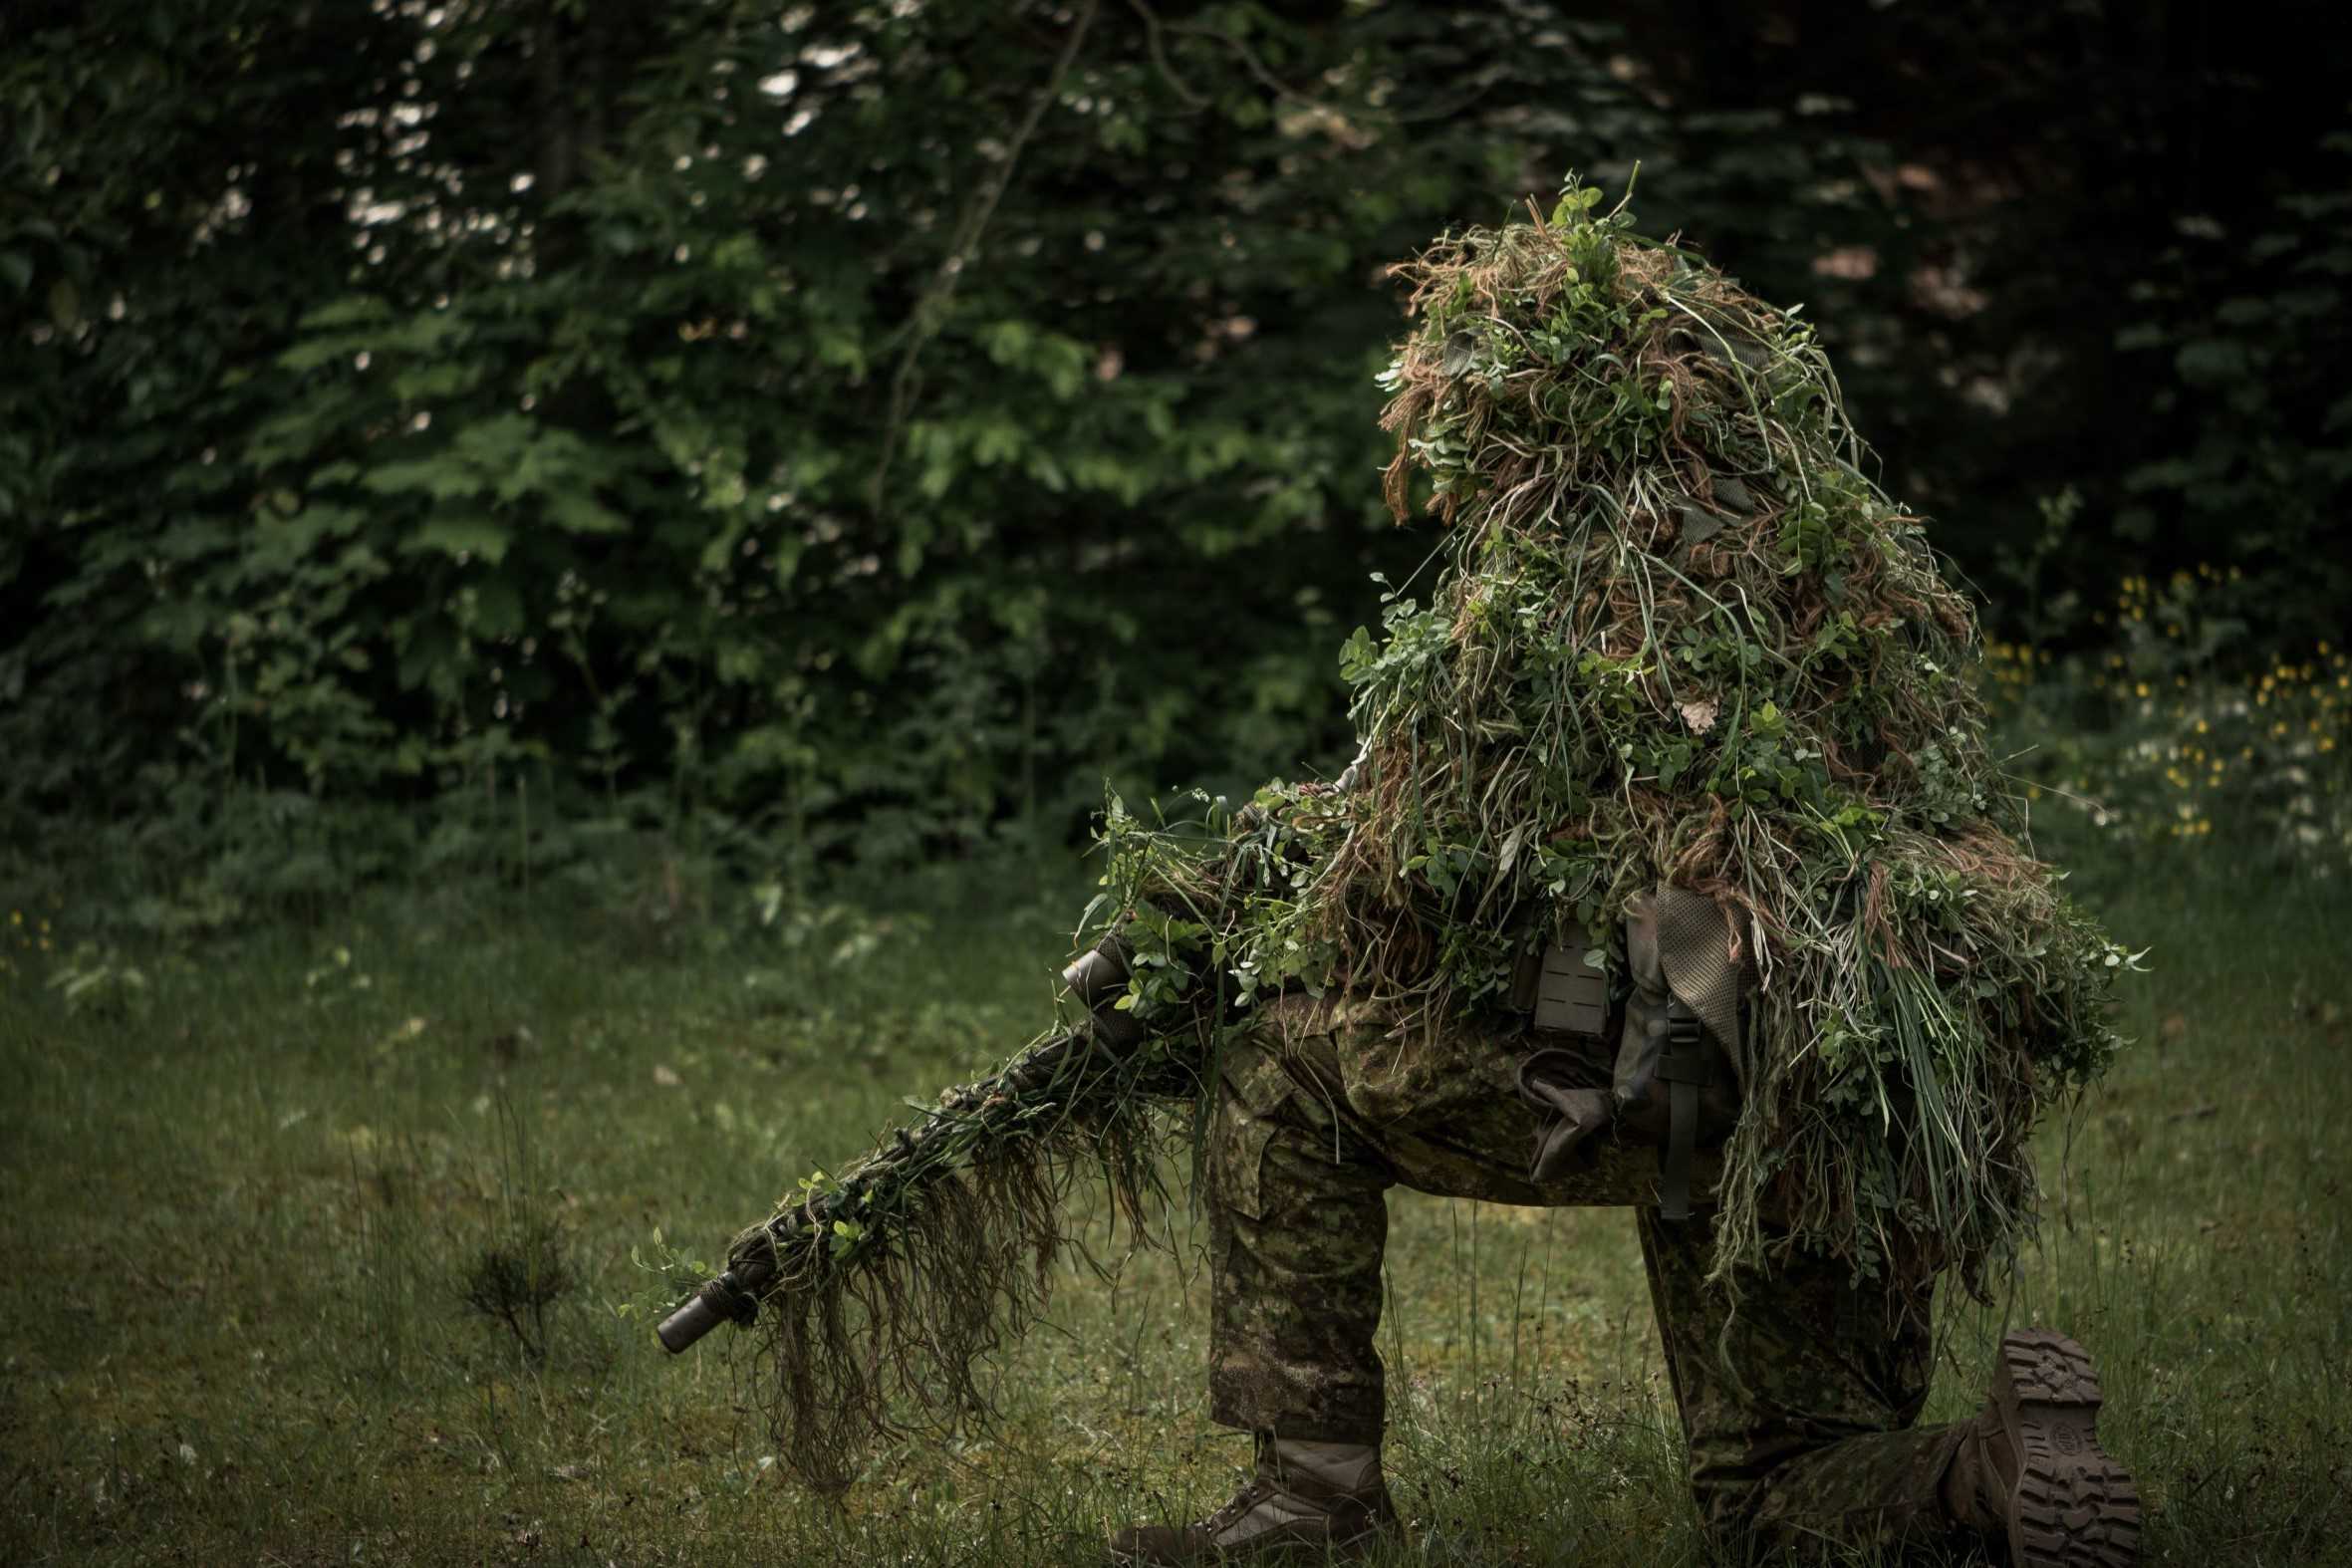 3D Camouflage Hunting Bionic Ghillie Suit Sniper Birdwatch Clothing for  Hunting | eBay